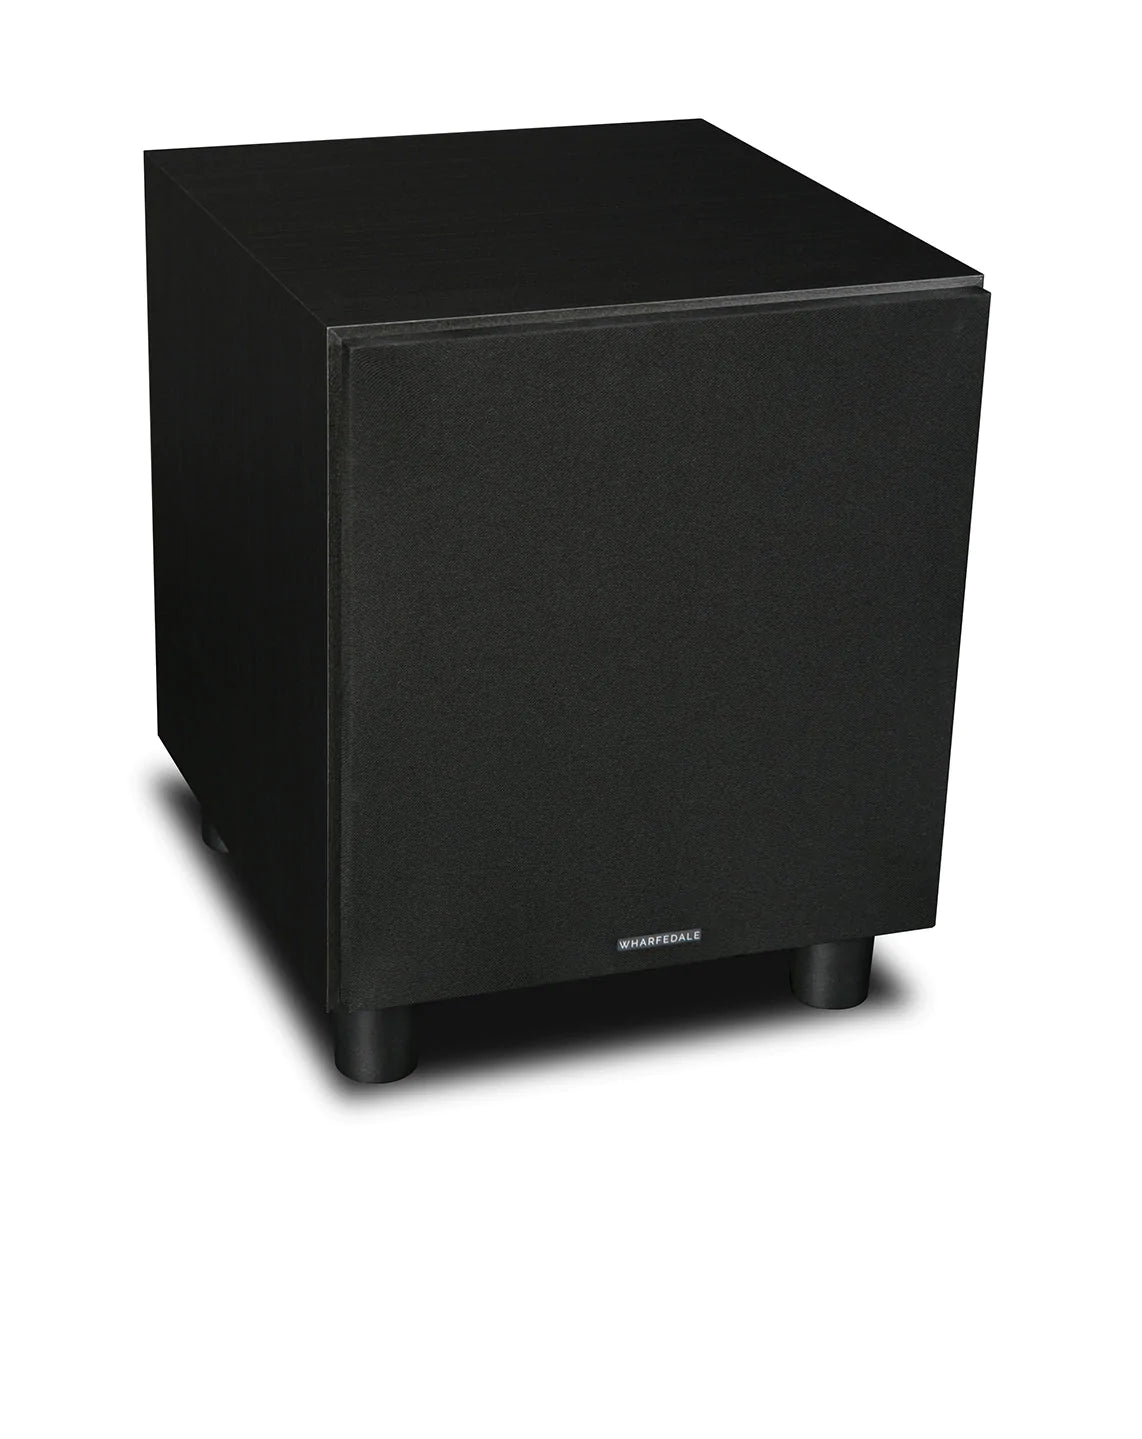 Wharfedale SW-12 Black 12 Inch Subwoofer